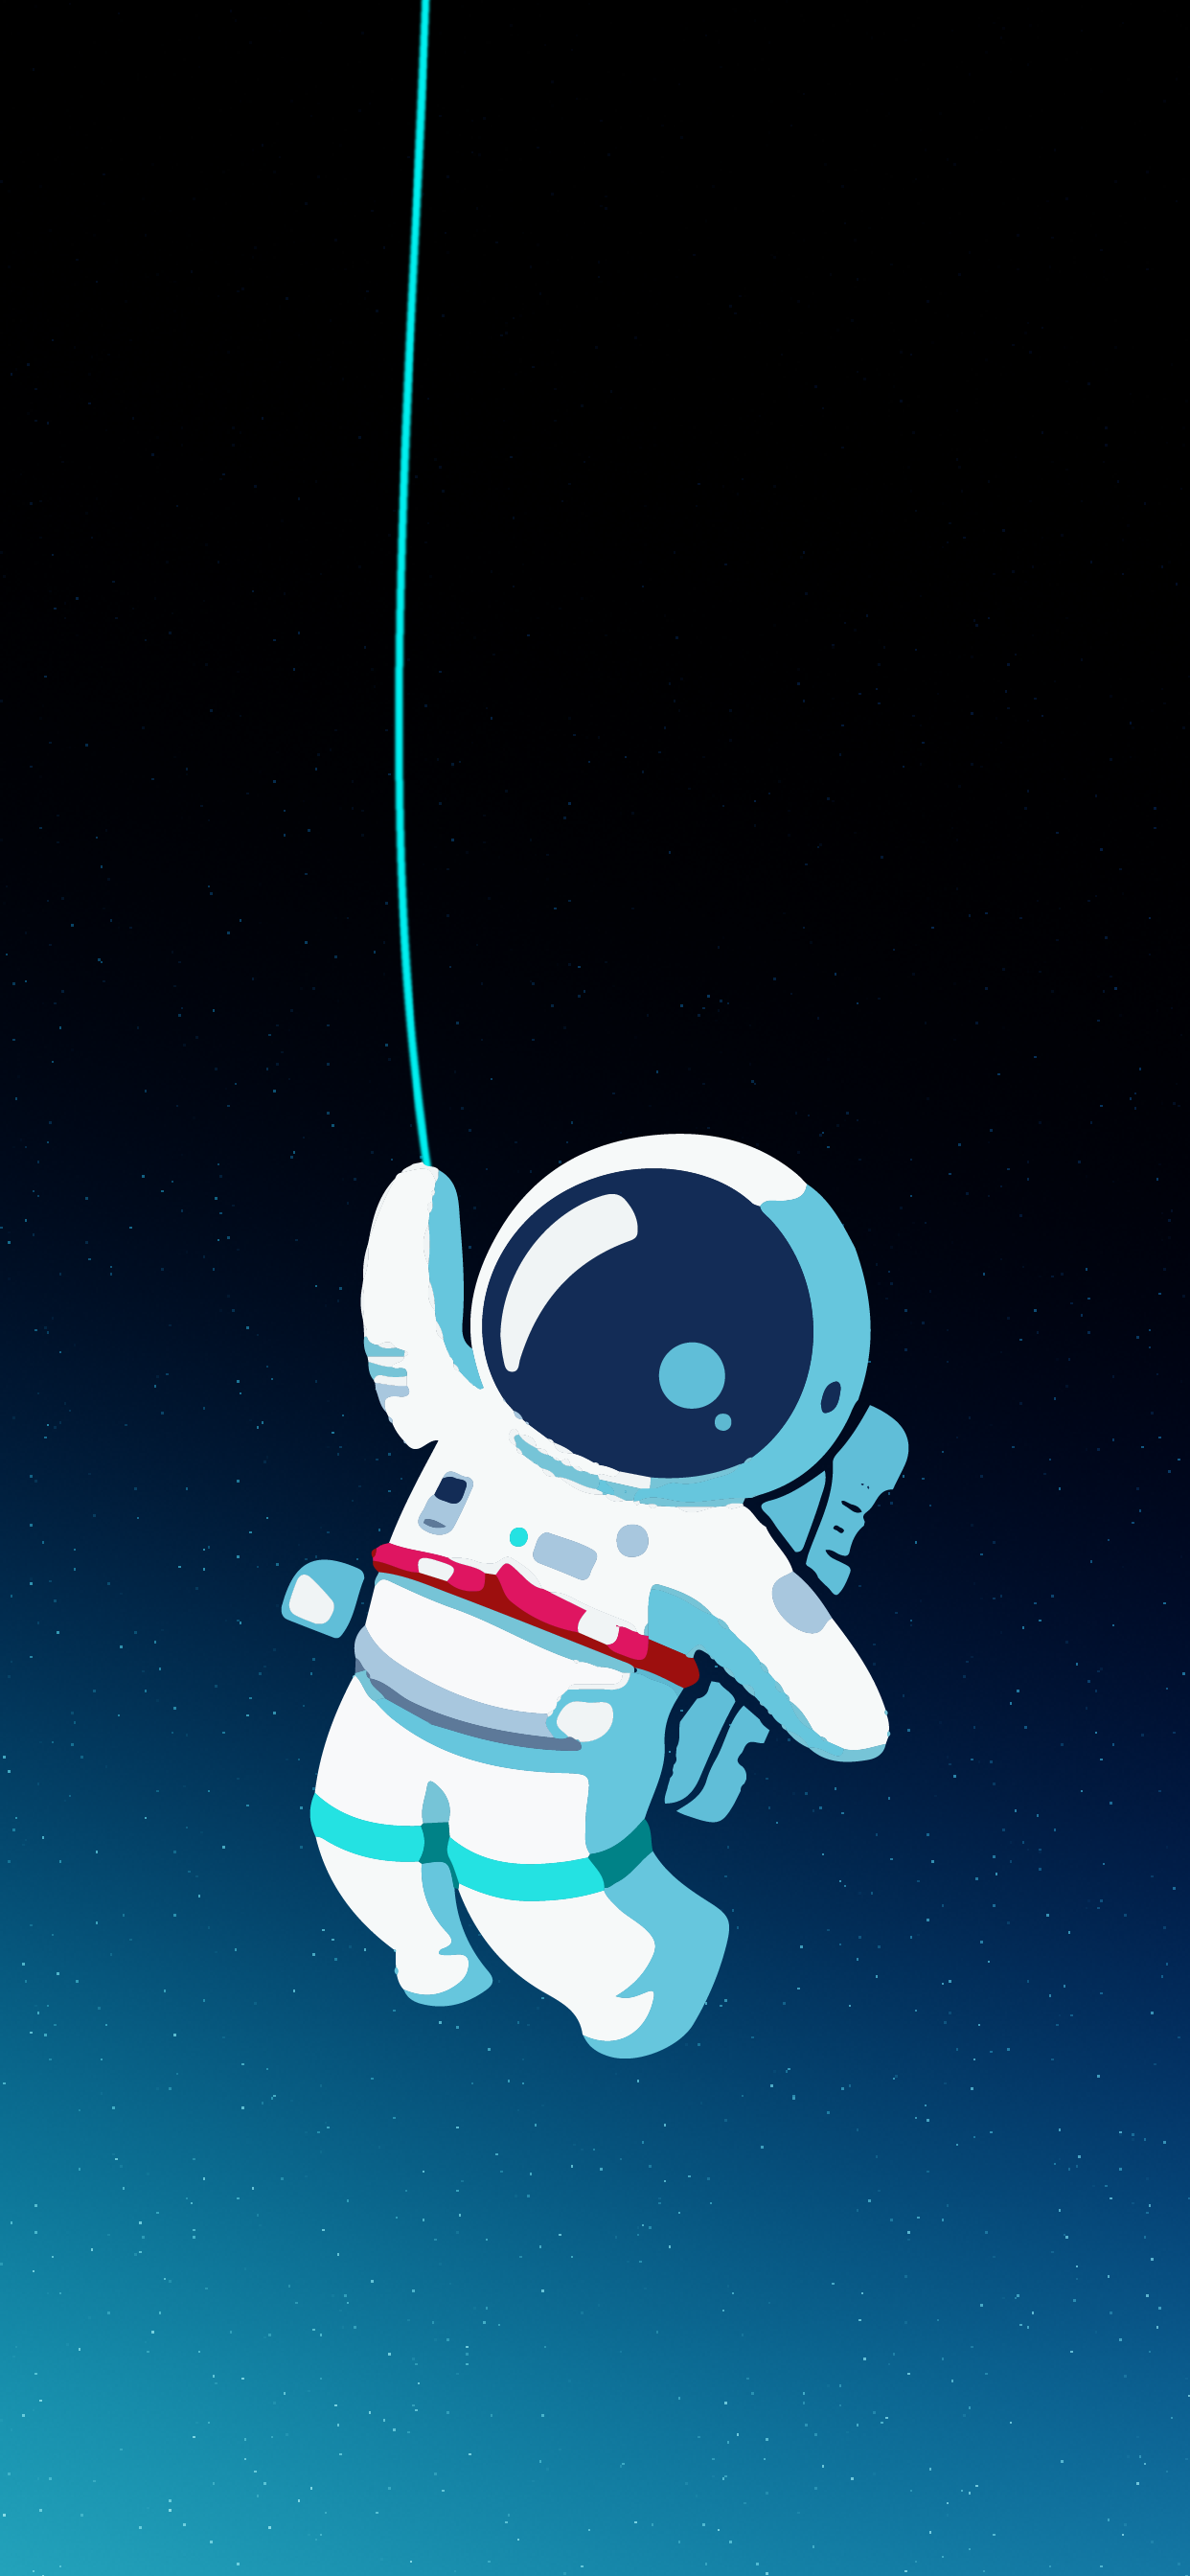 Wallpaper Astronaut Space Cartoon Art Electric Blue Background   Download Free Image